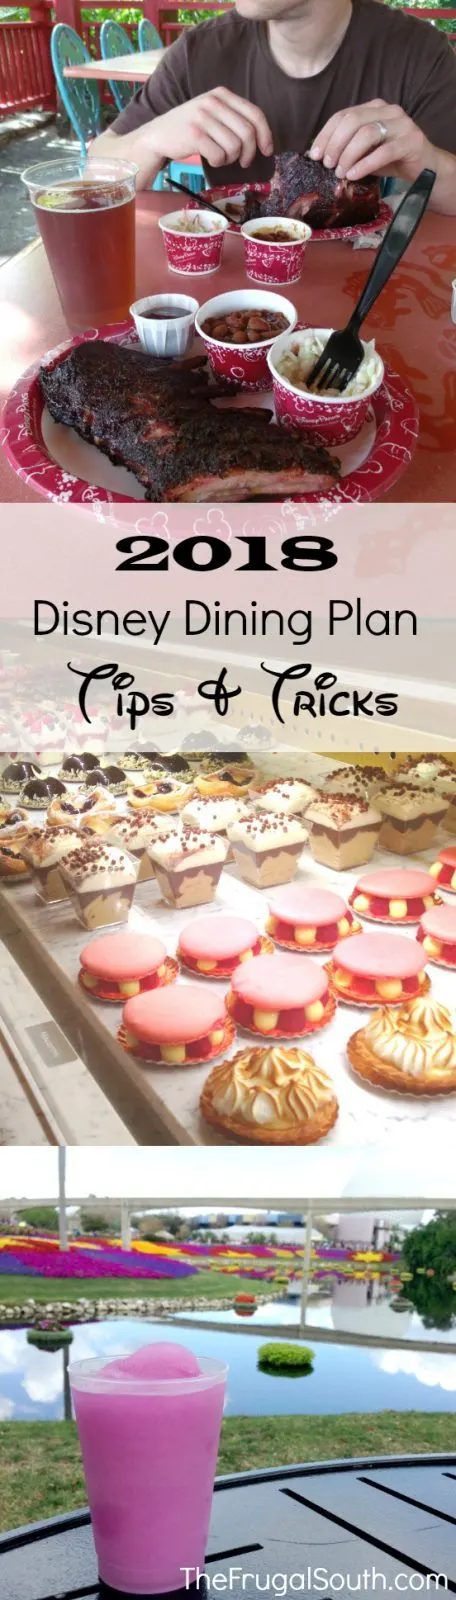 Tips & tricks for getting the most out of the Disney Dining Plan at Walt Disney World!